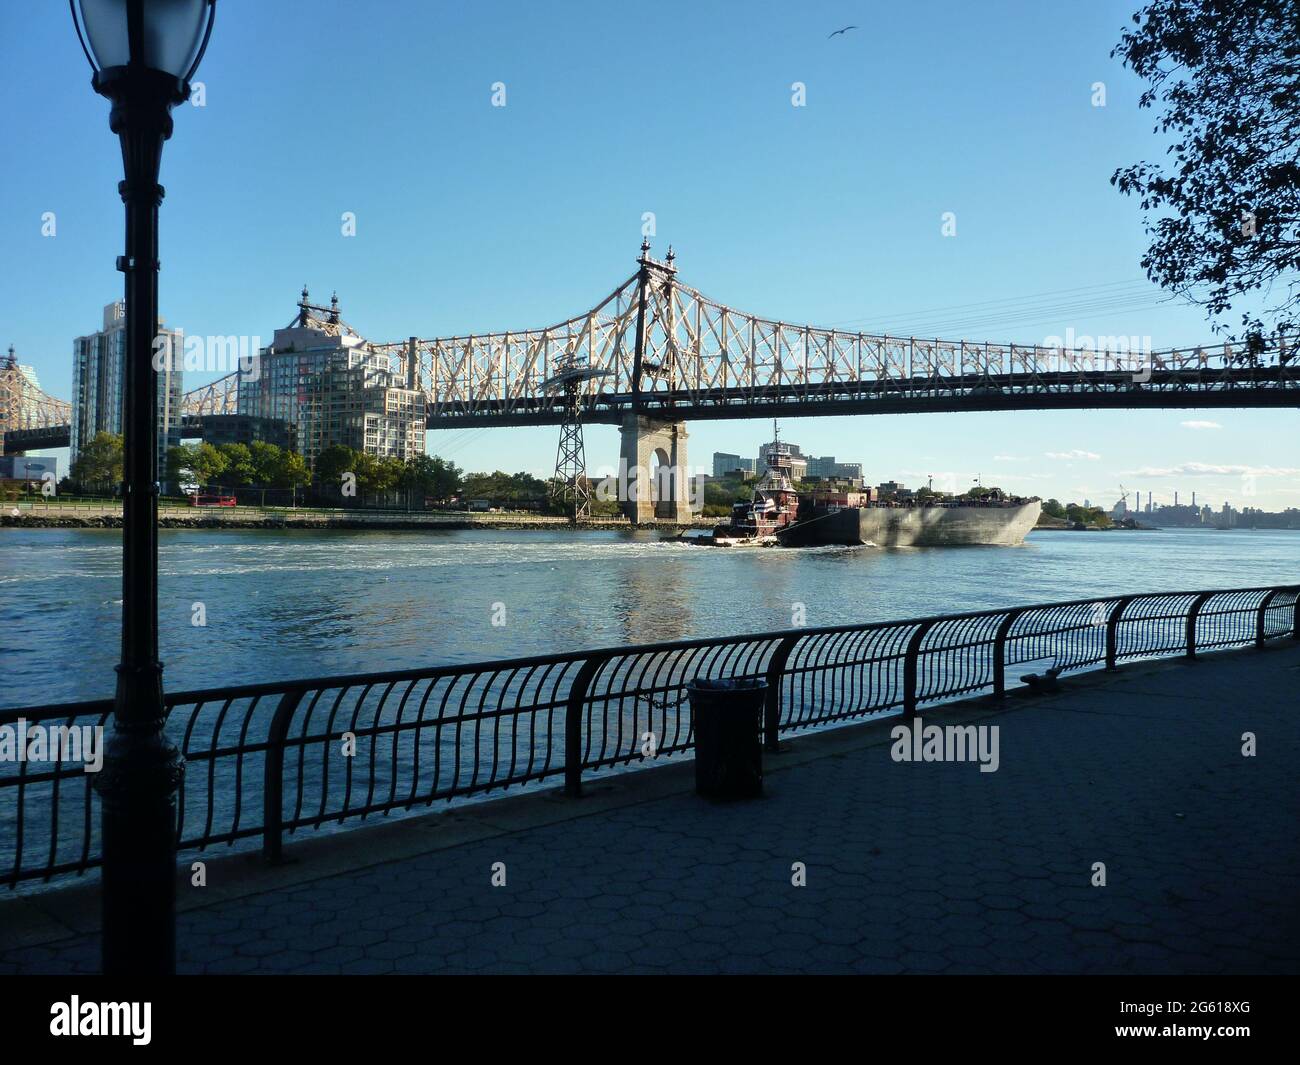 The 59th Street Bridge, also known as the Queensboro Bridge, seen from Roosevelt Island. Copy space. Stock Photo